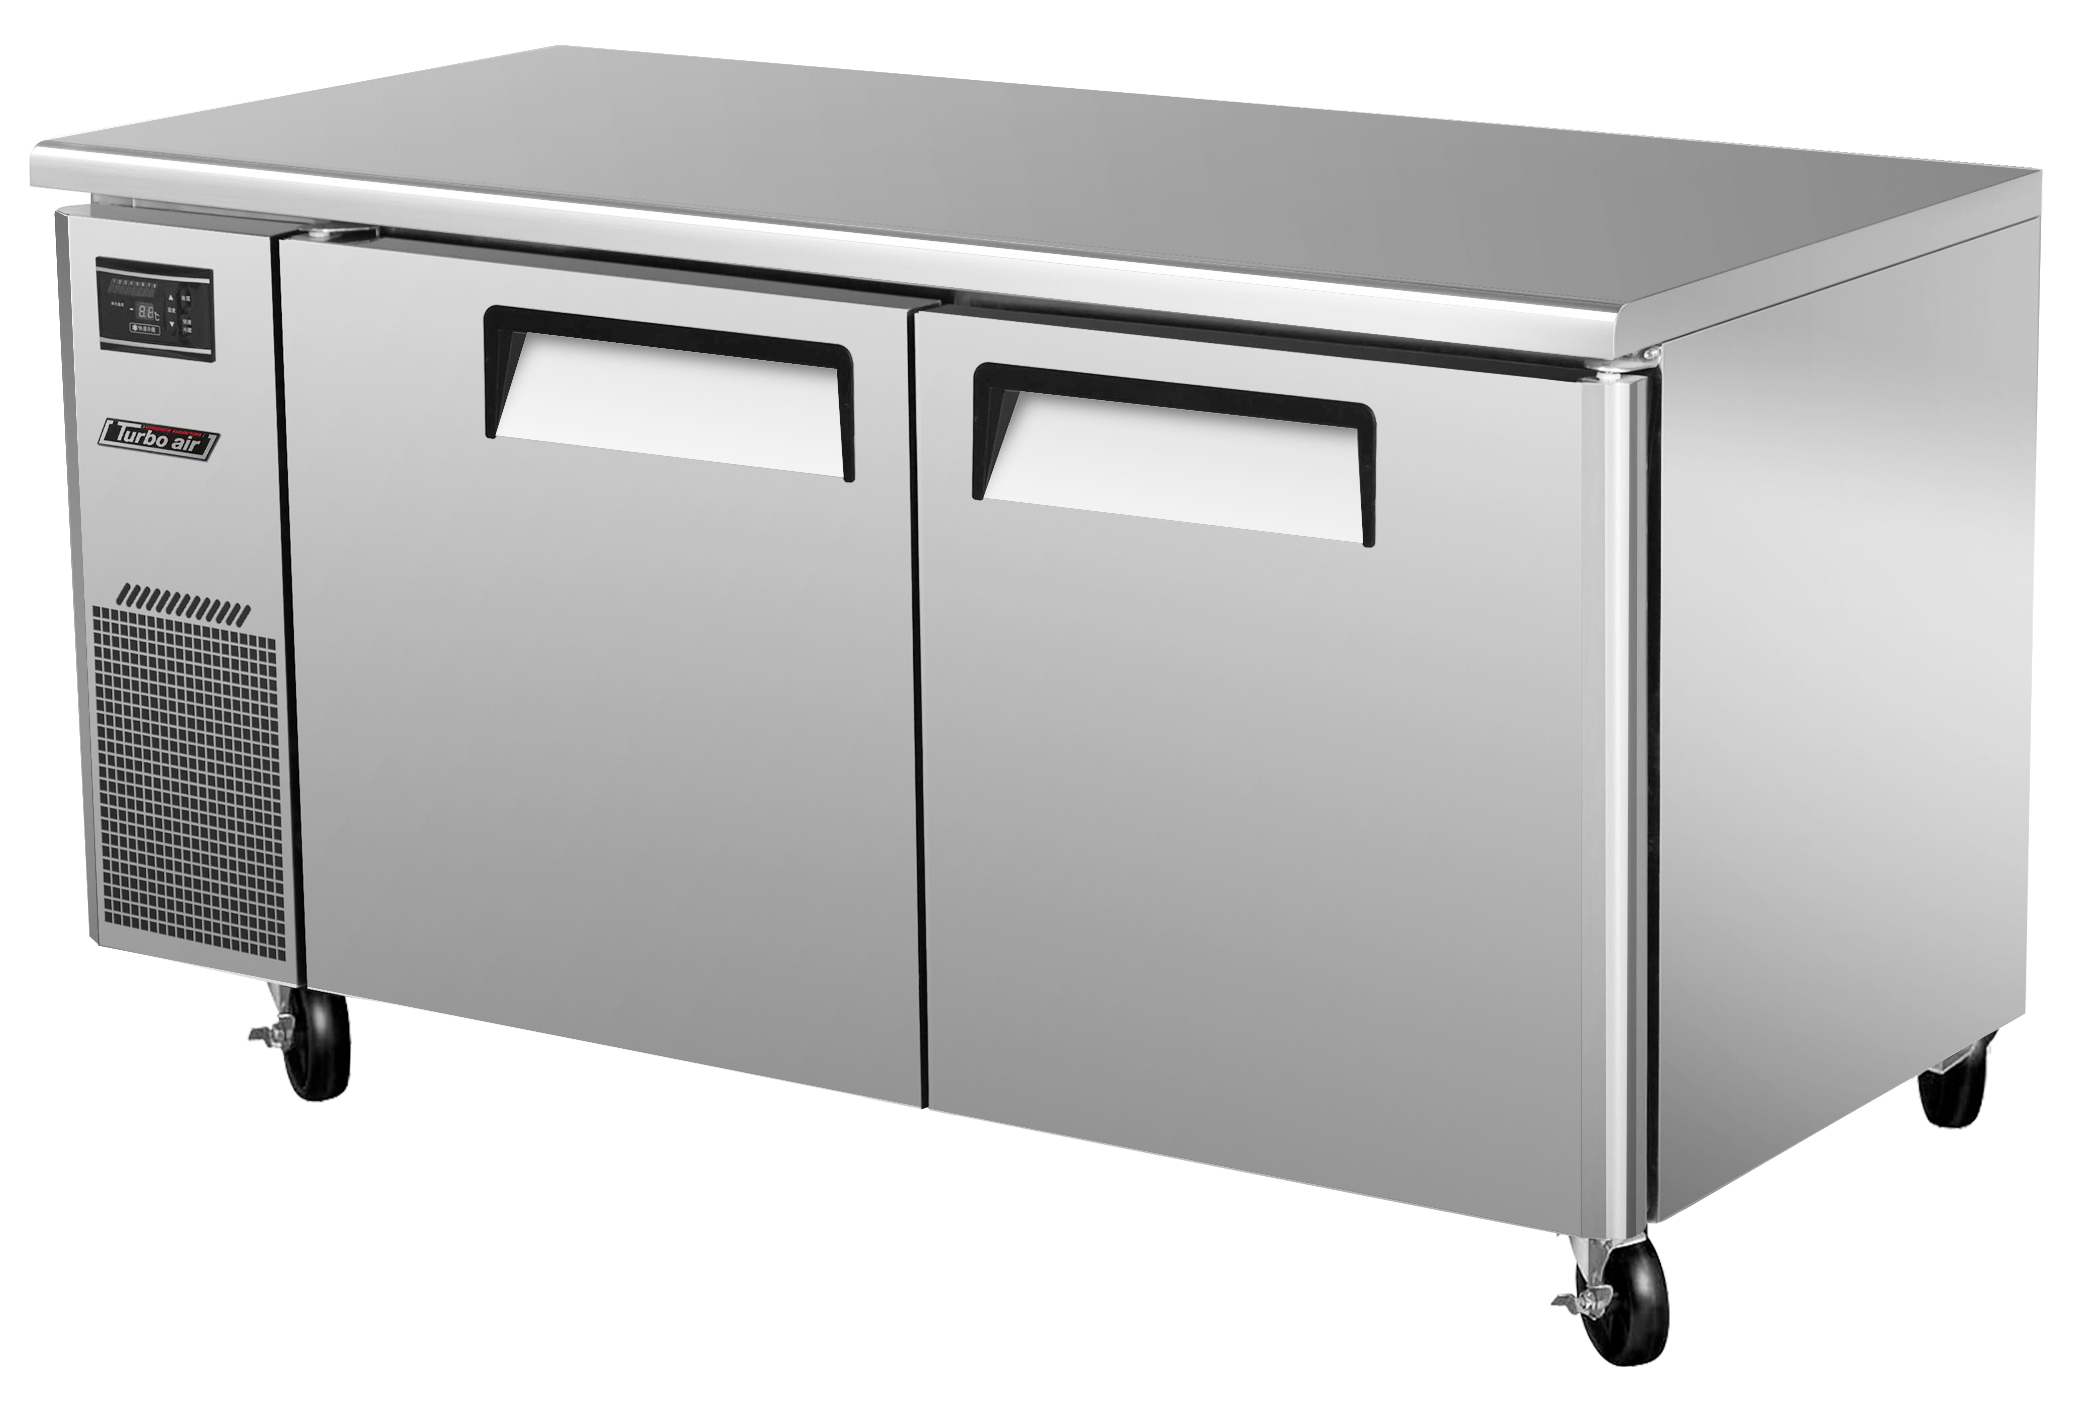 J Series Side Mount Undercounter Refrigerator - Click Image to Close